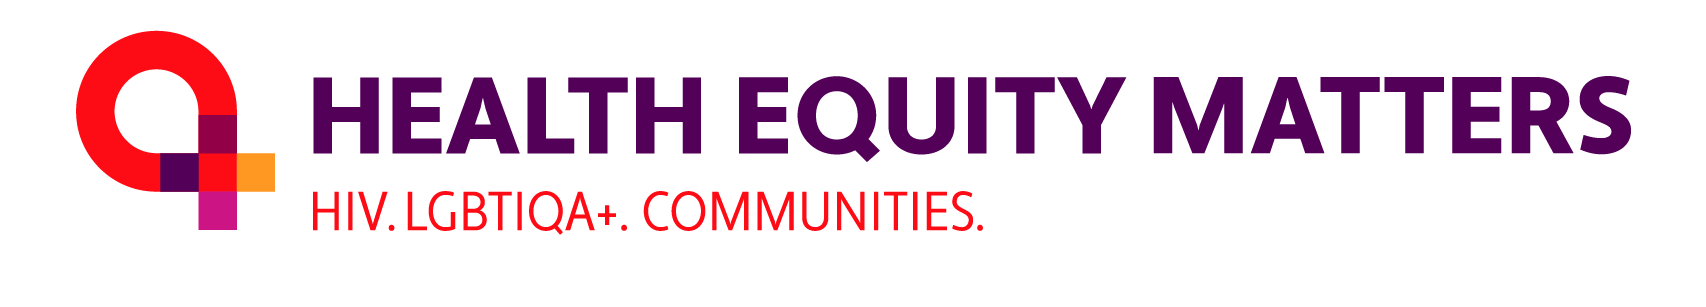 Health Equity Matters (formerly Australian Federation of AIDS Organizations)